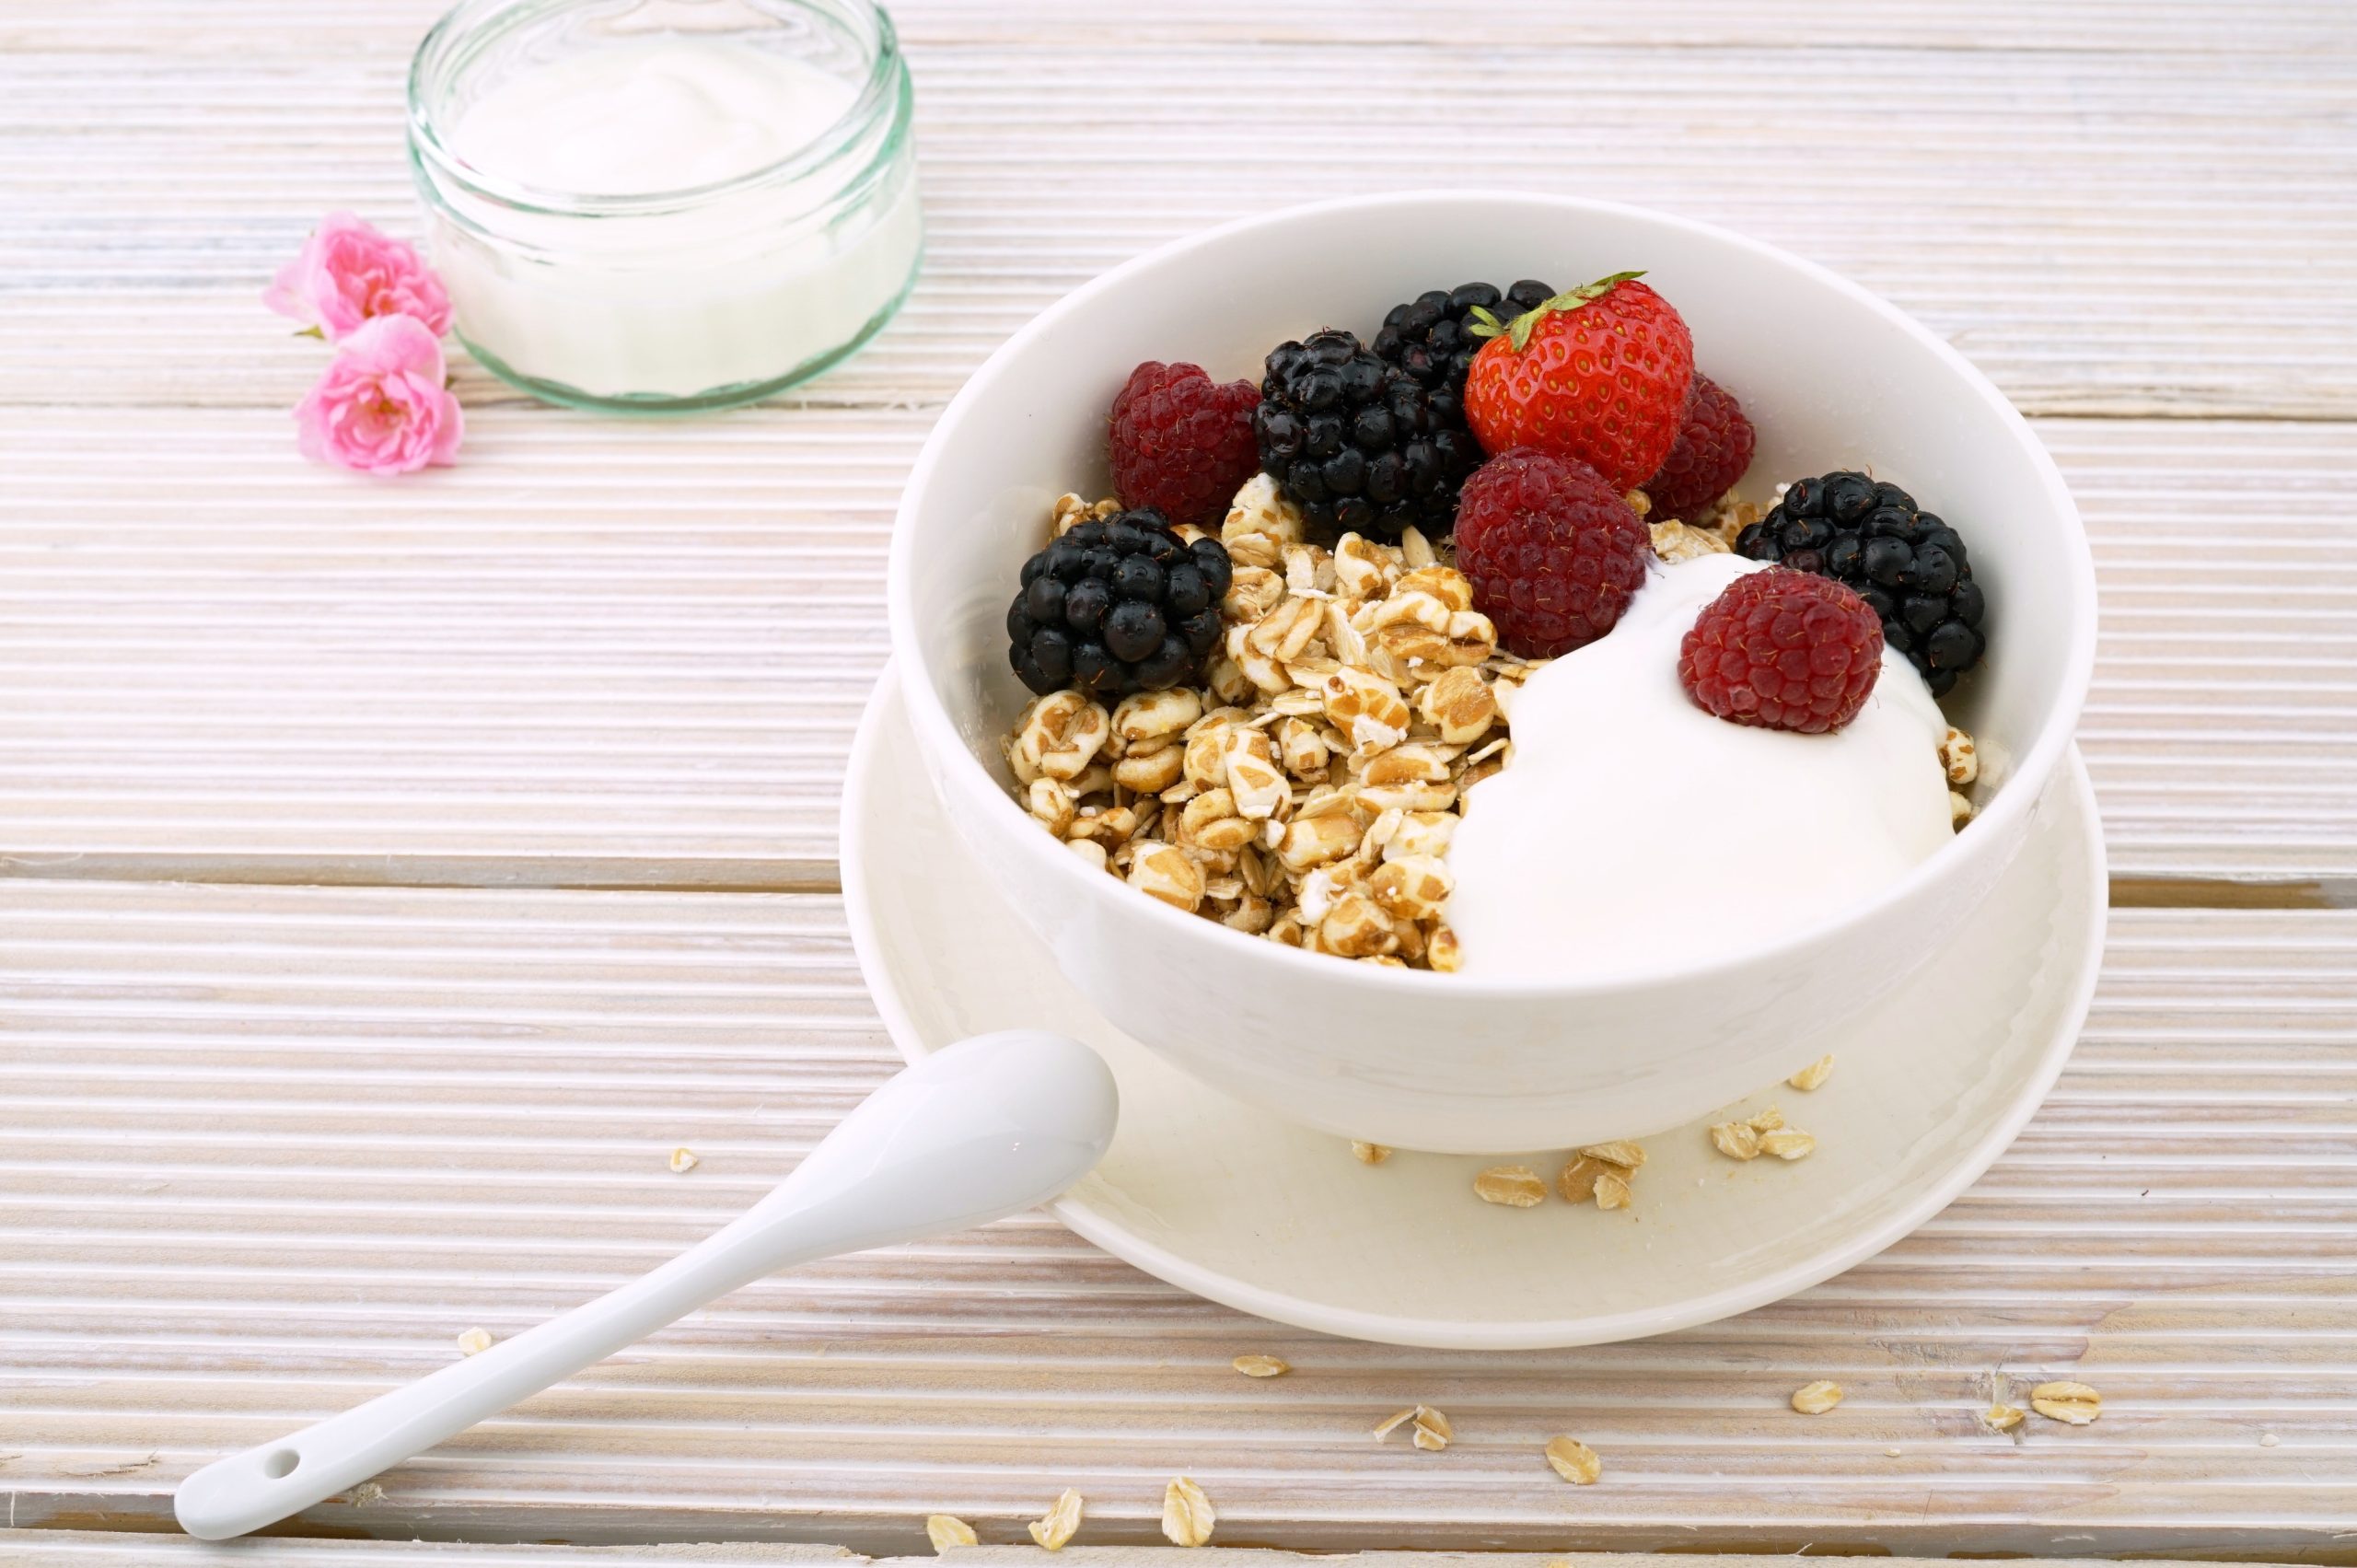 An oatmeal bowl served for breakfast.